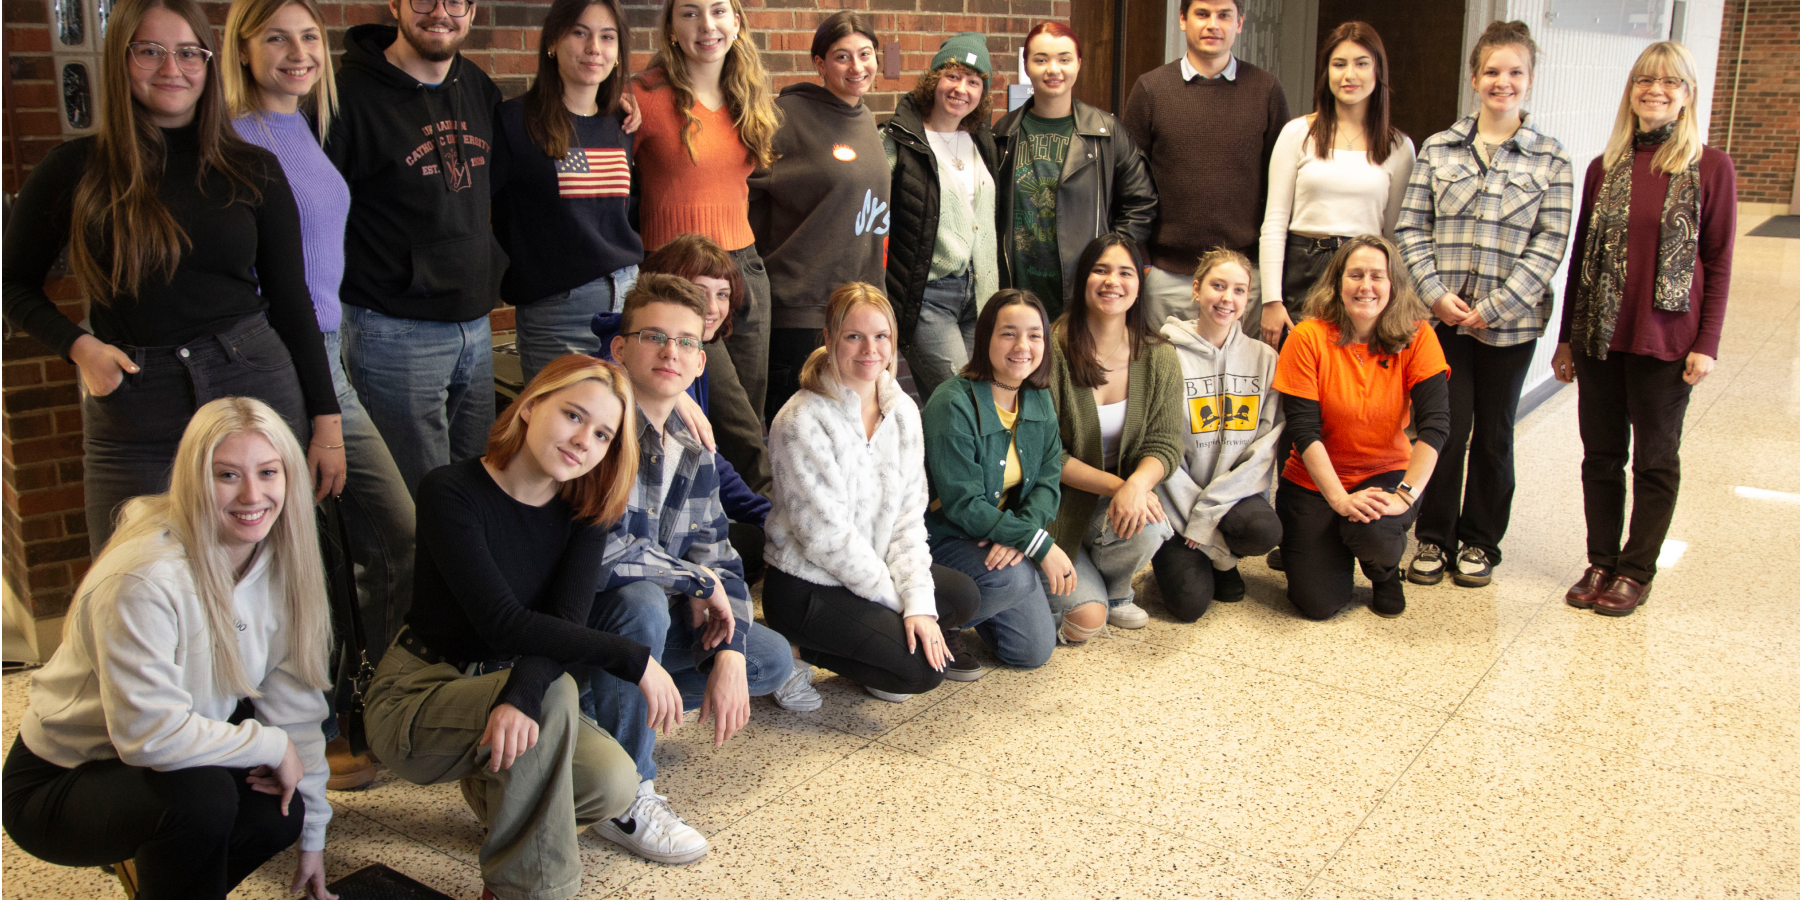 group photo of students from Ukraine on campus